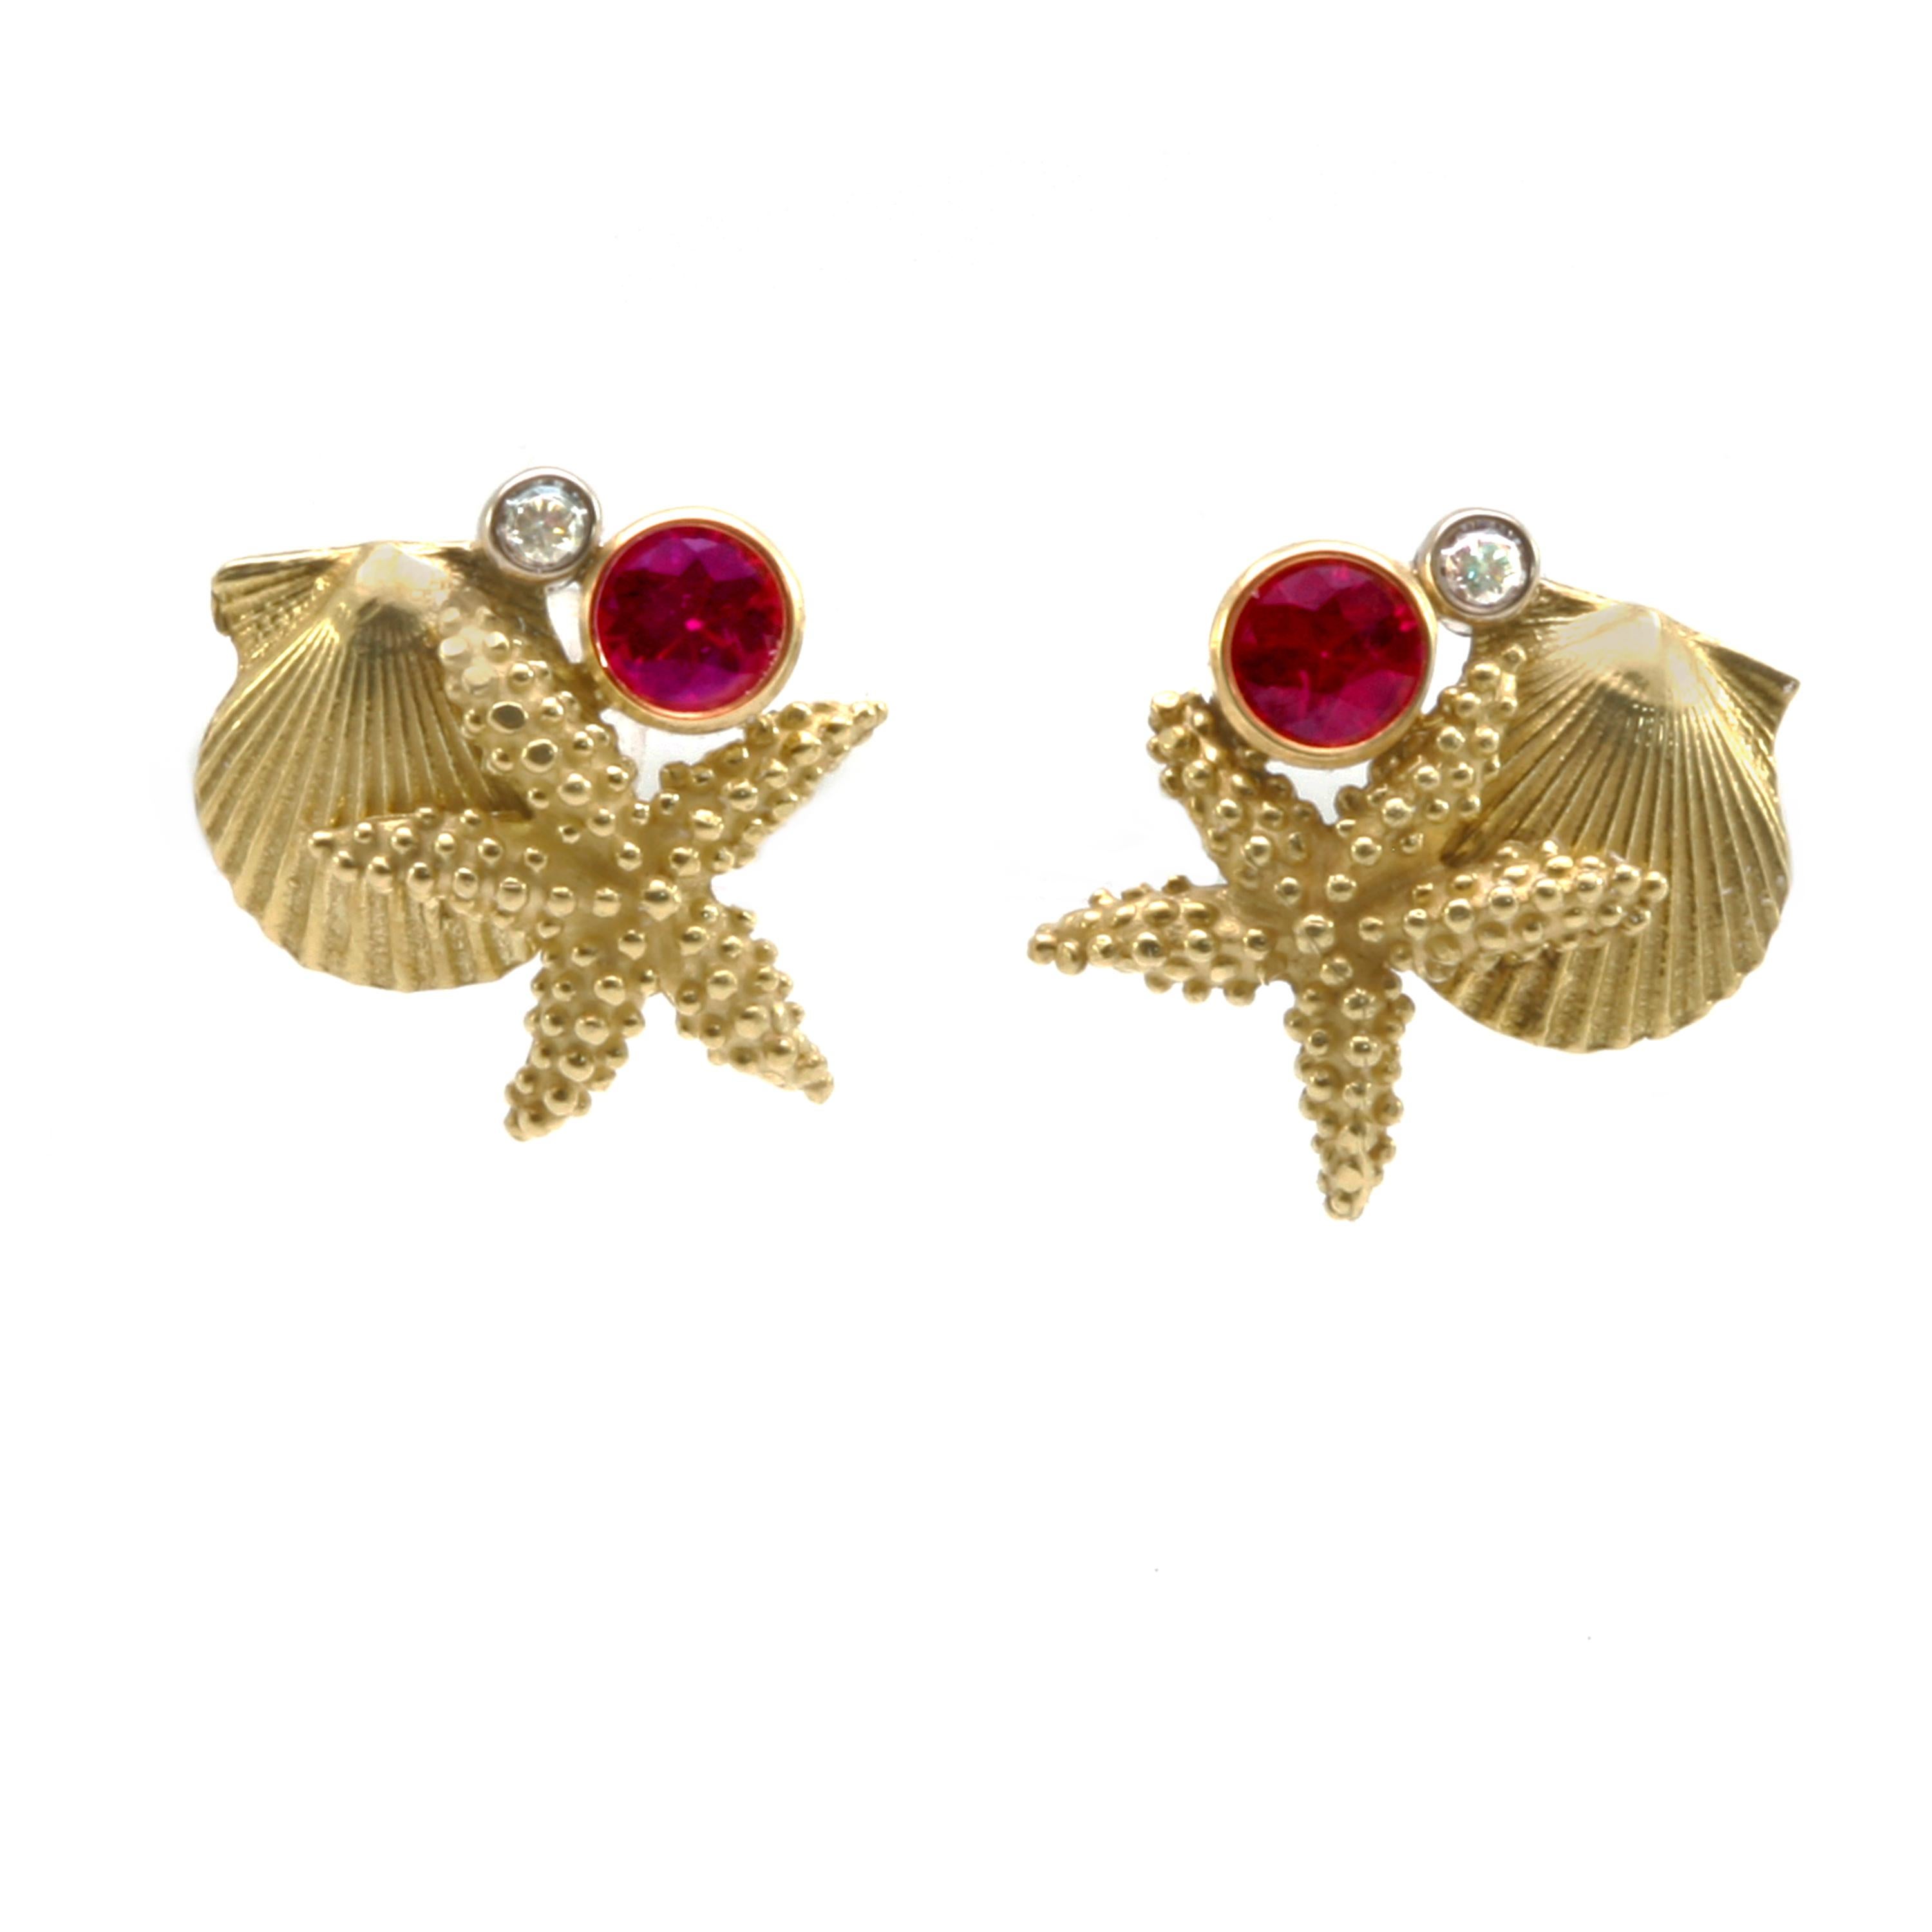  A  scallop and Starfish are finished with a faceted ruby and diamond on each earring. They are set with .40 carat rubies and .06 carat diamonds.  The legs of the sea stars intertwine with the Ruby, Diamond, and scallop shell to form an intriguing